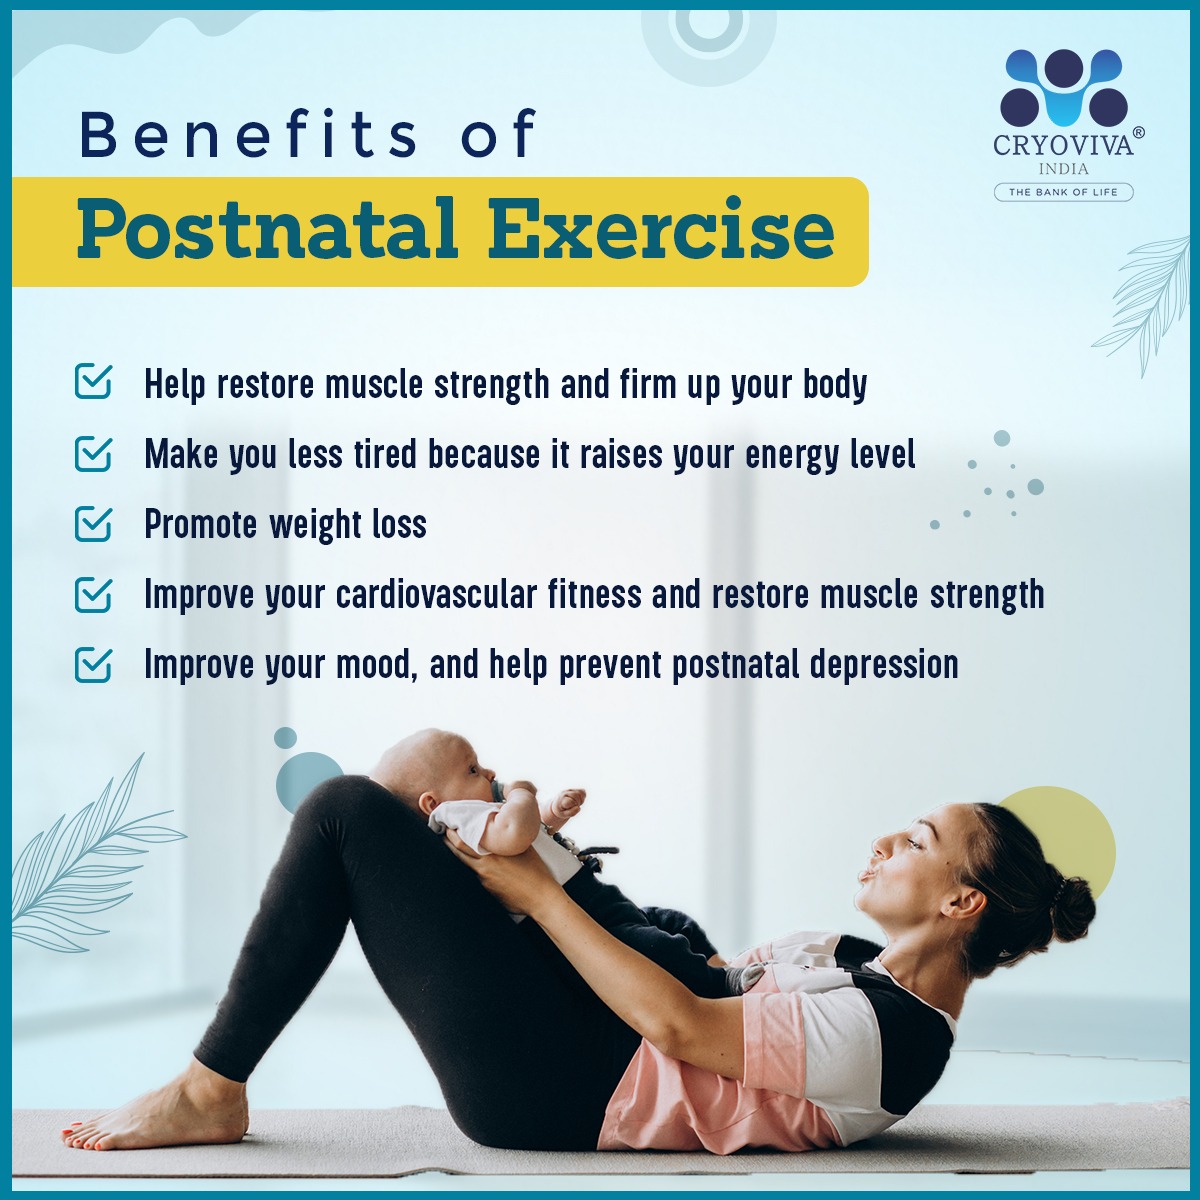 Regular #exercise offers several health advantages that apply equally to new mothers as to everyone else at any stage of life. 
#postnatalexercise #postnatalexercise #postnatalwellbeing #postnatalfitness #postnatalmotivation #postnatalsupport #postnataljourney #newbaby #pregnancy